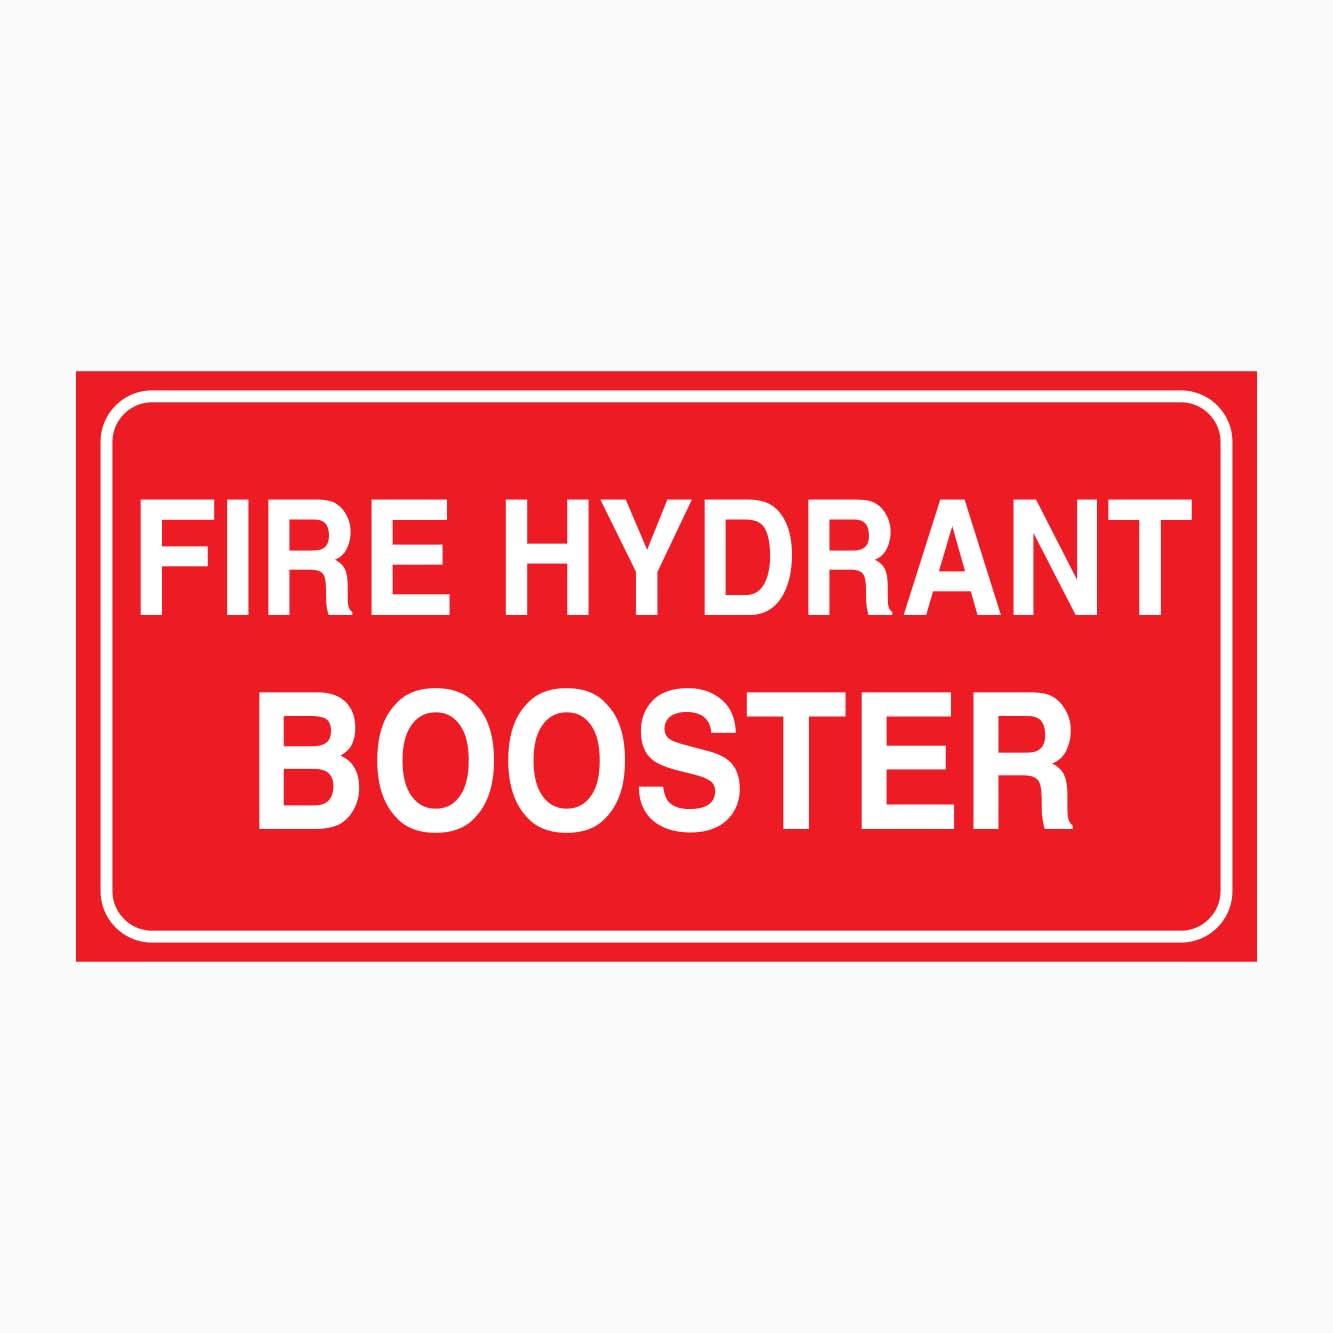 FIRE HYDRANT BOOSTER SIGN - GET SIGNS - STATUTORY SIGNS